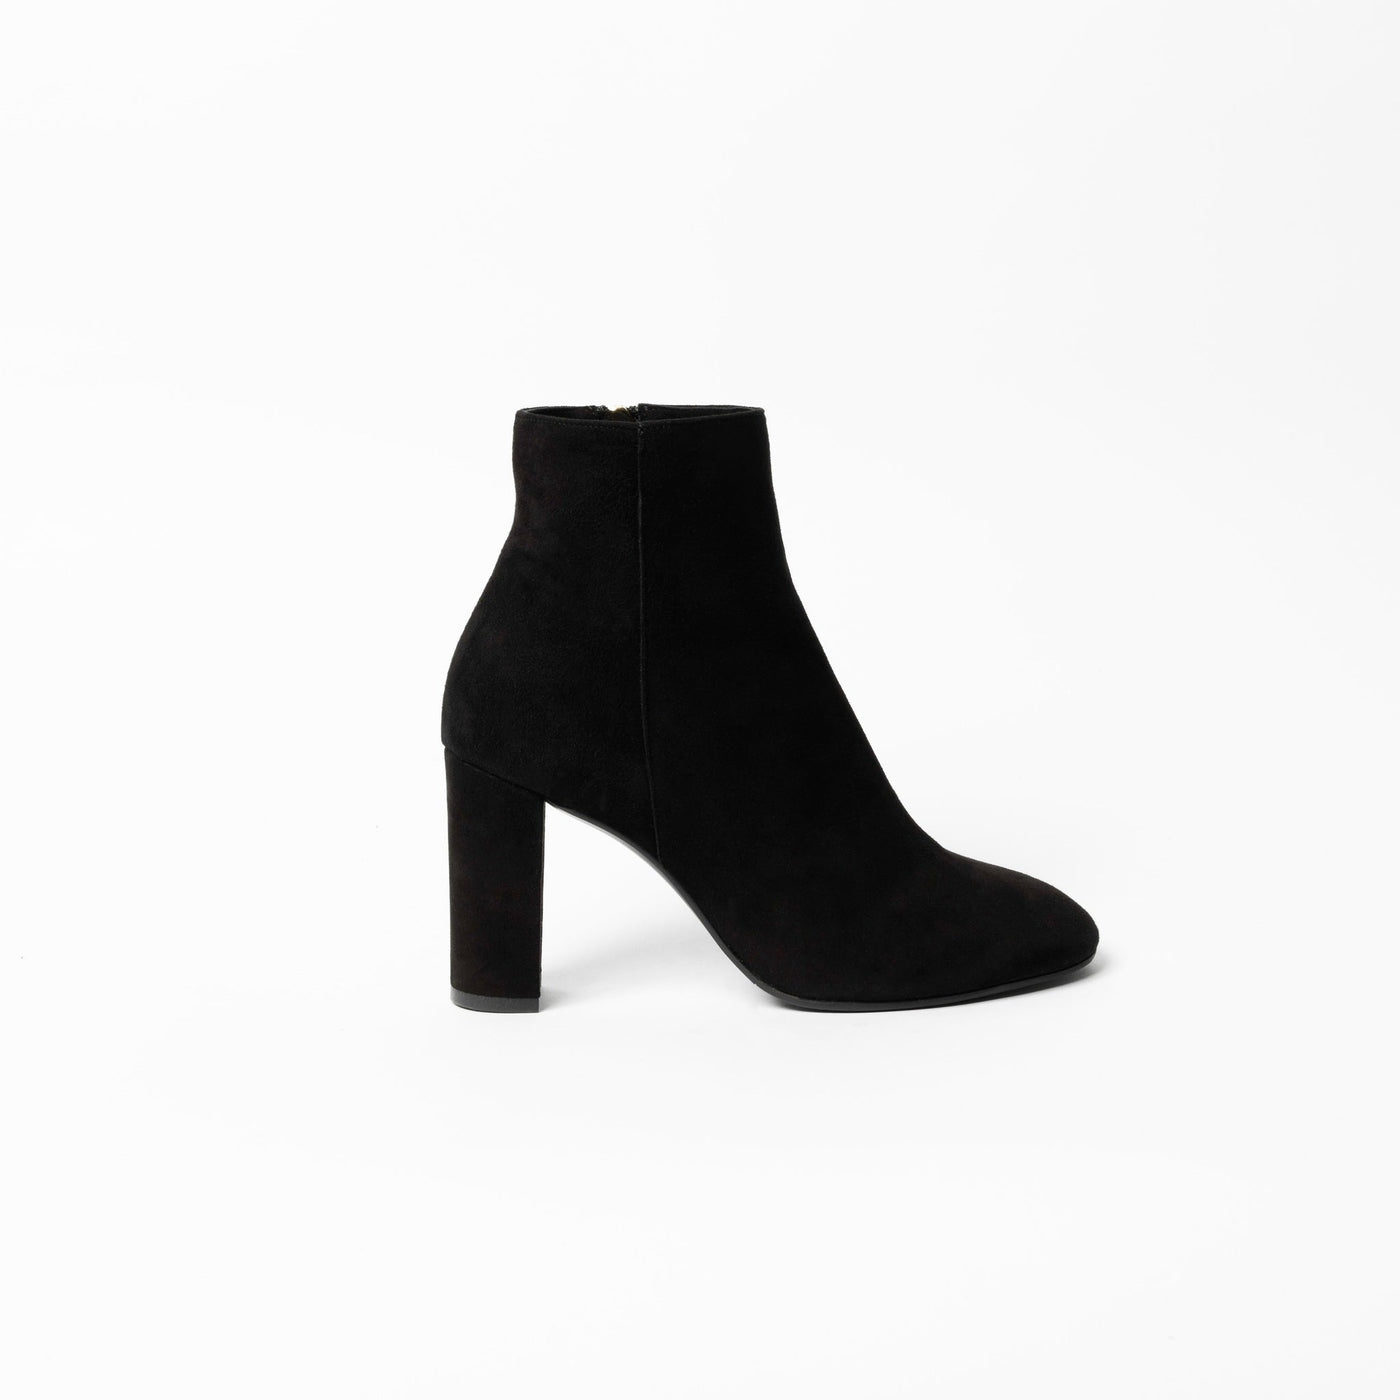 Black suede ankle boots with block heel. 